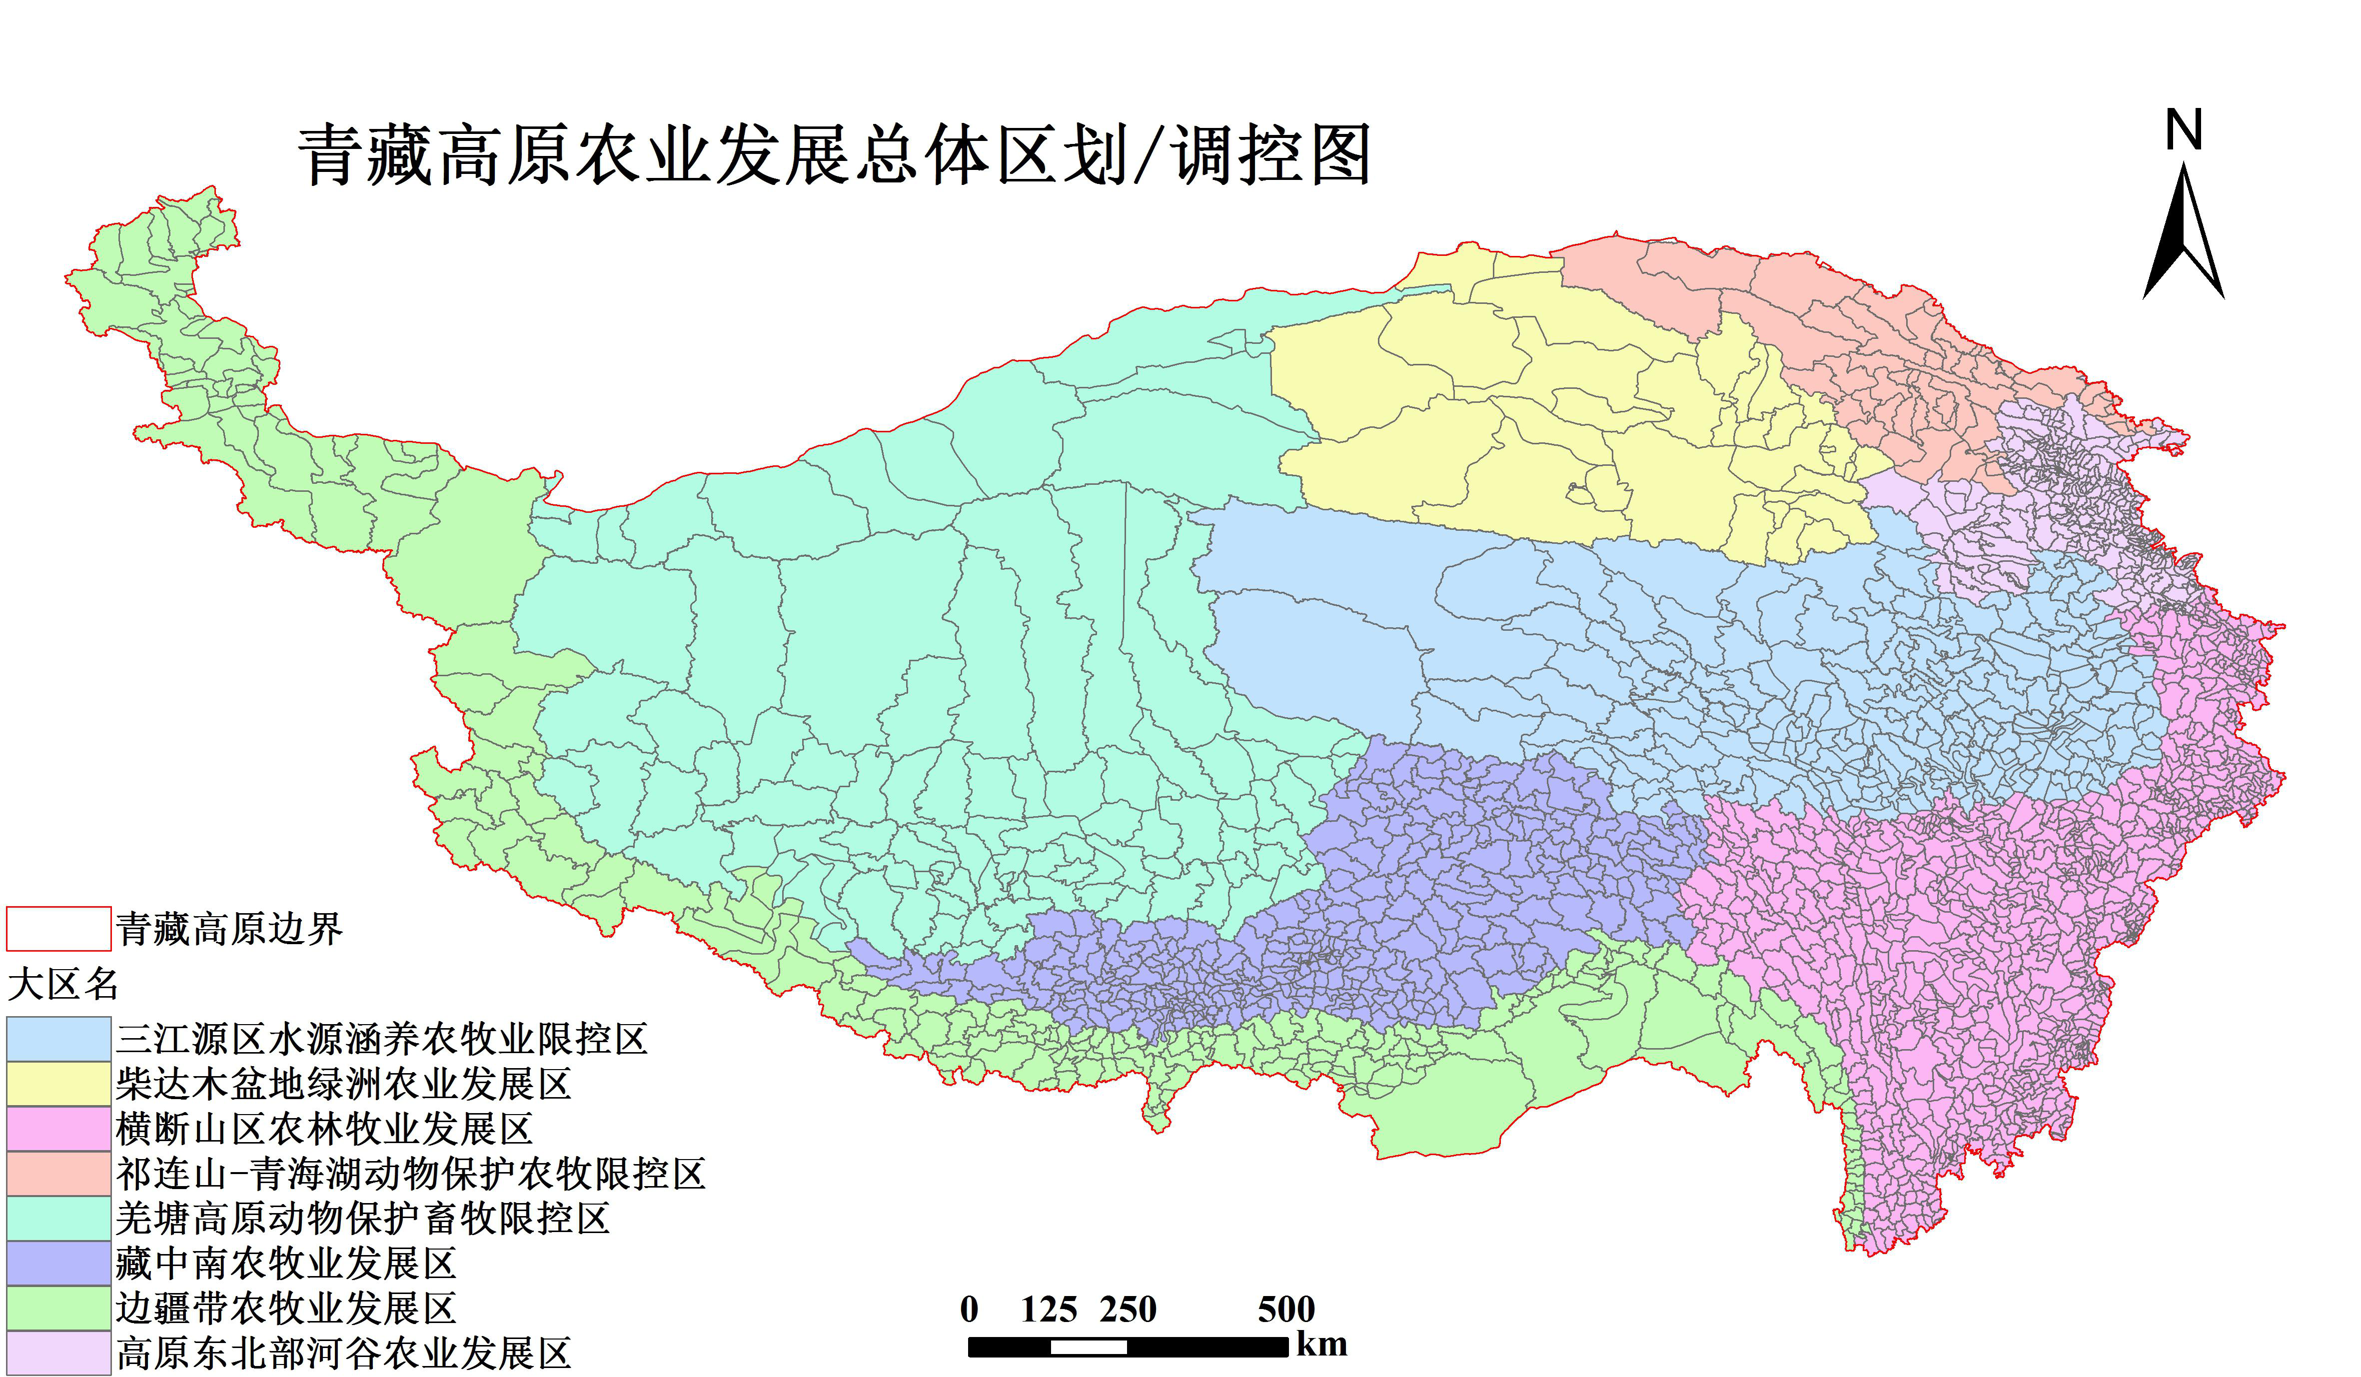 Division map of agricultural development in the Tibetan Plateau (2020)